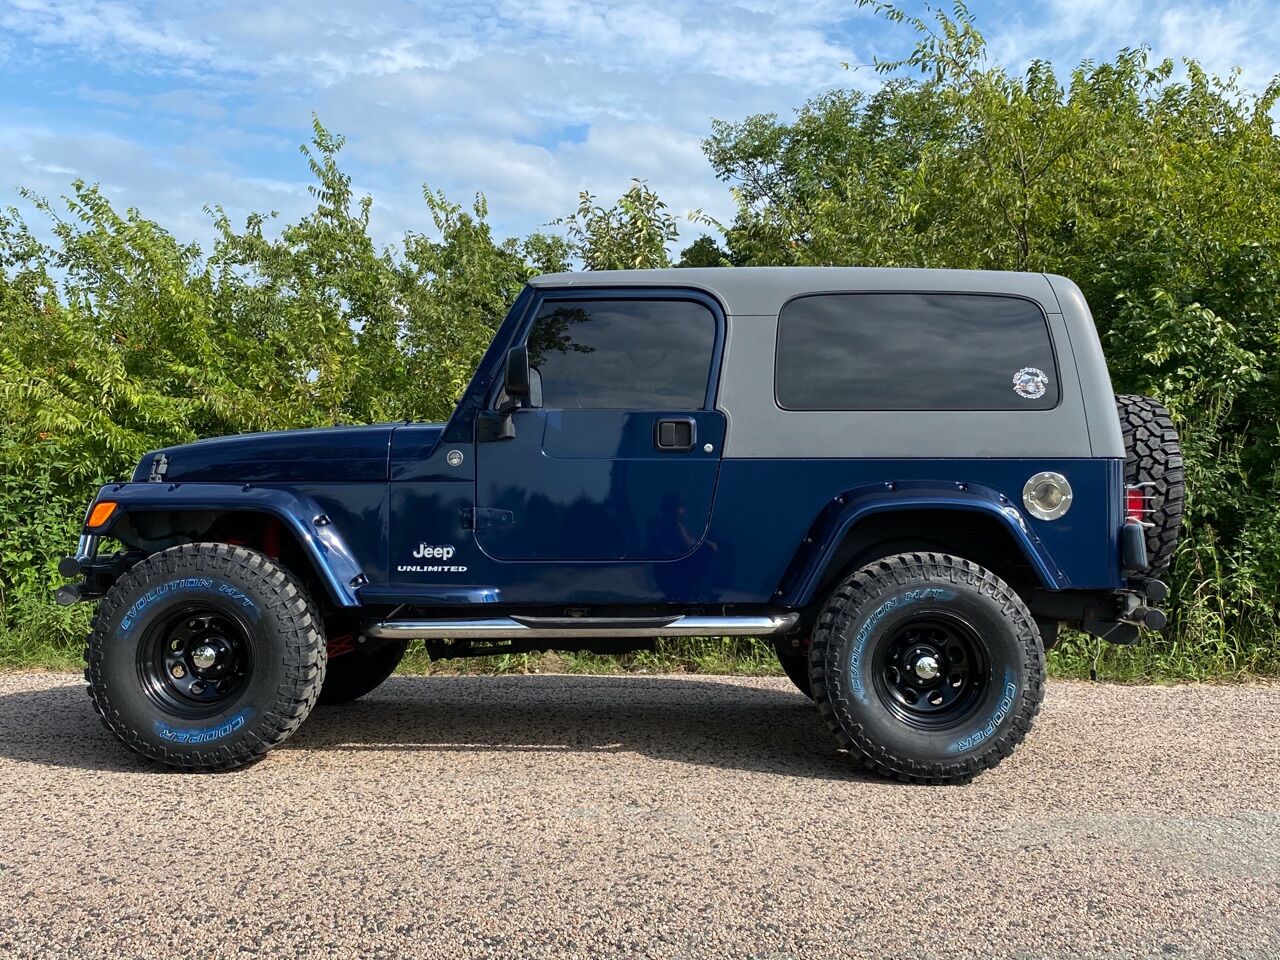 2005 Jeep Wrangler For Sale In Ardmore, OK ®